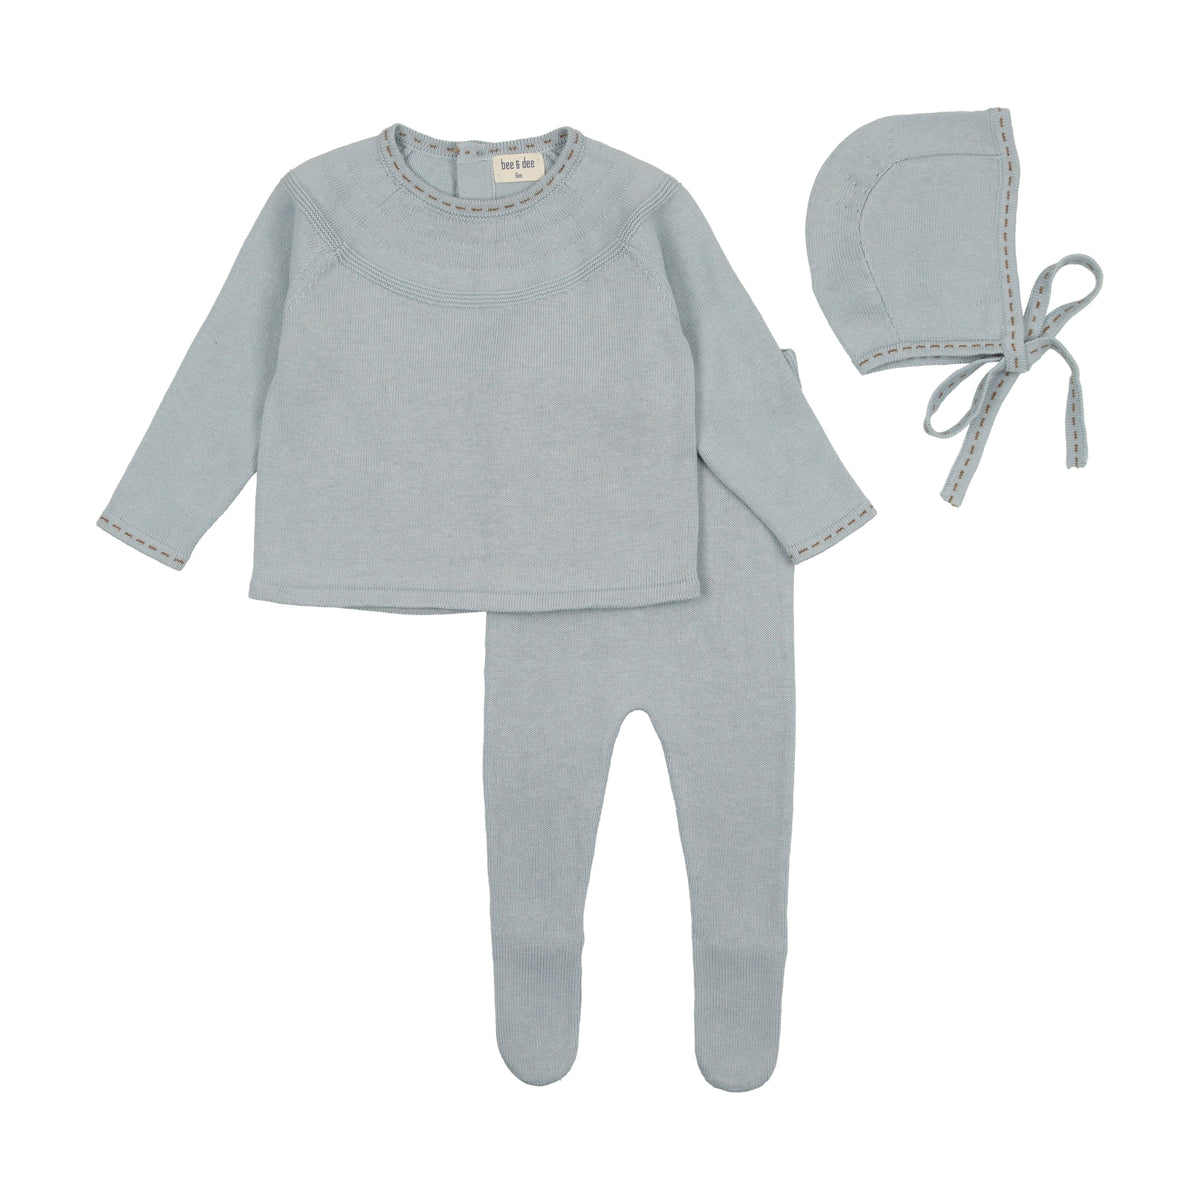 Contrast Stitch Knit Two Piece Outfit